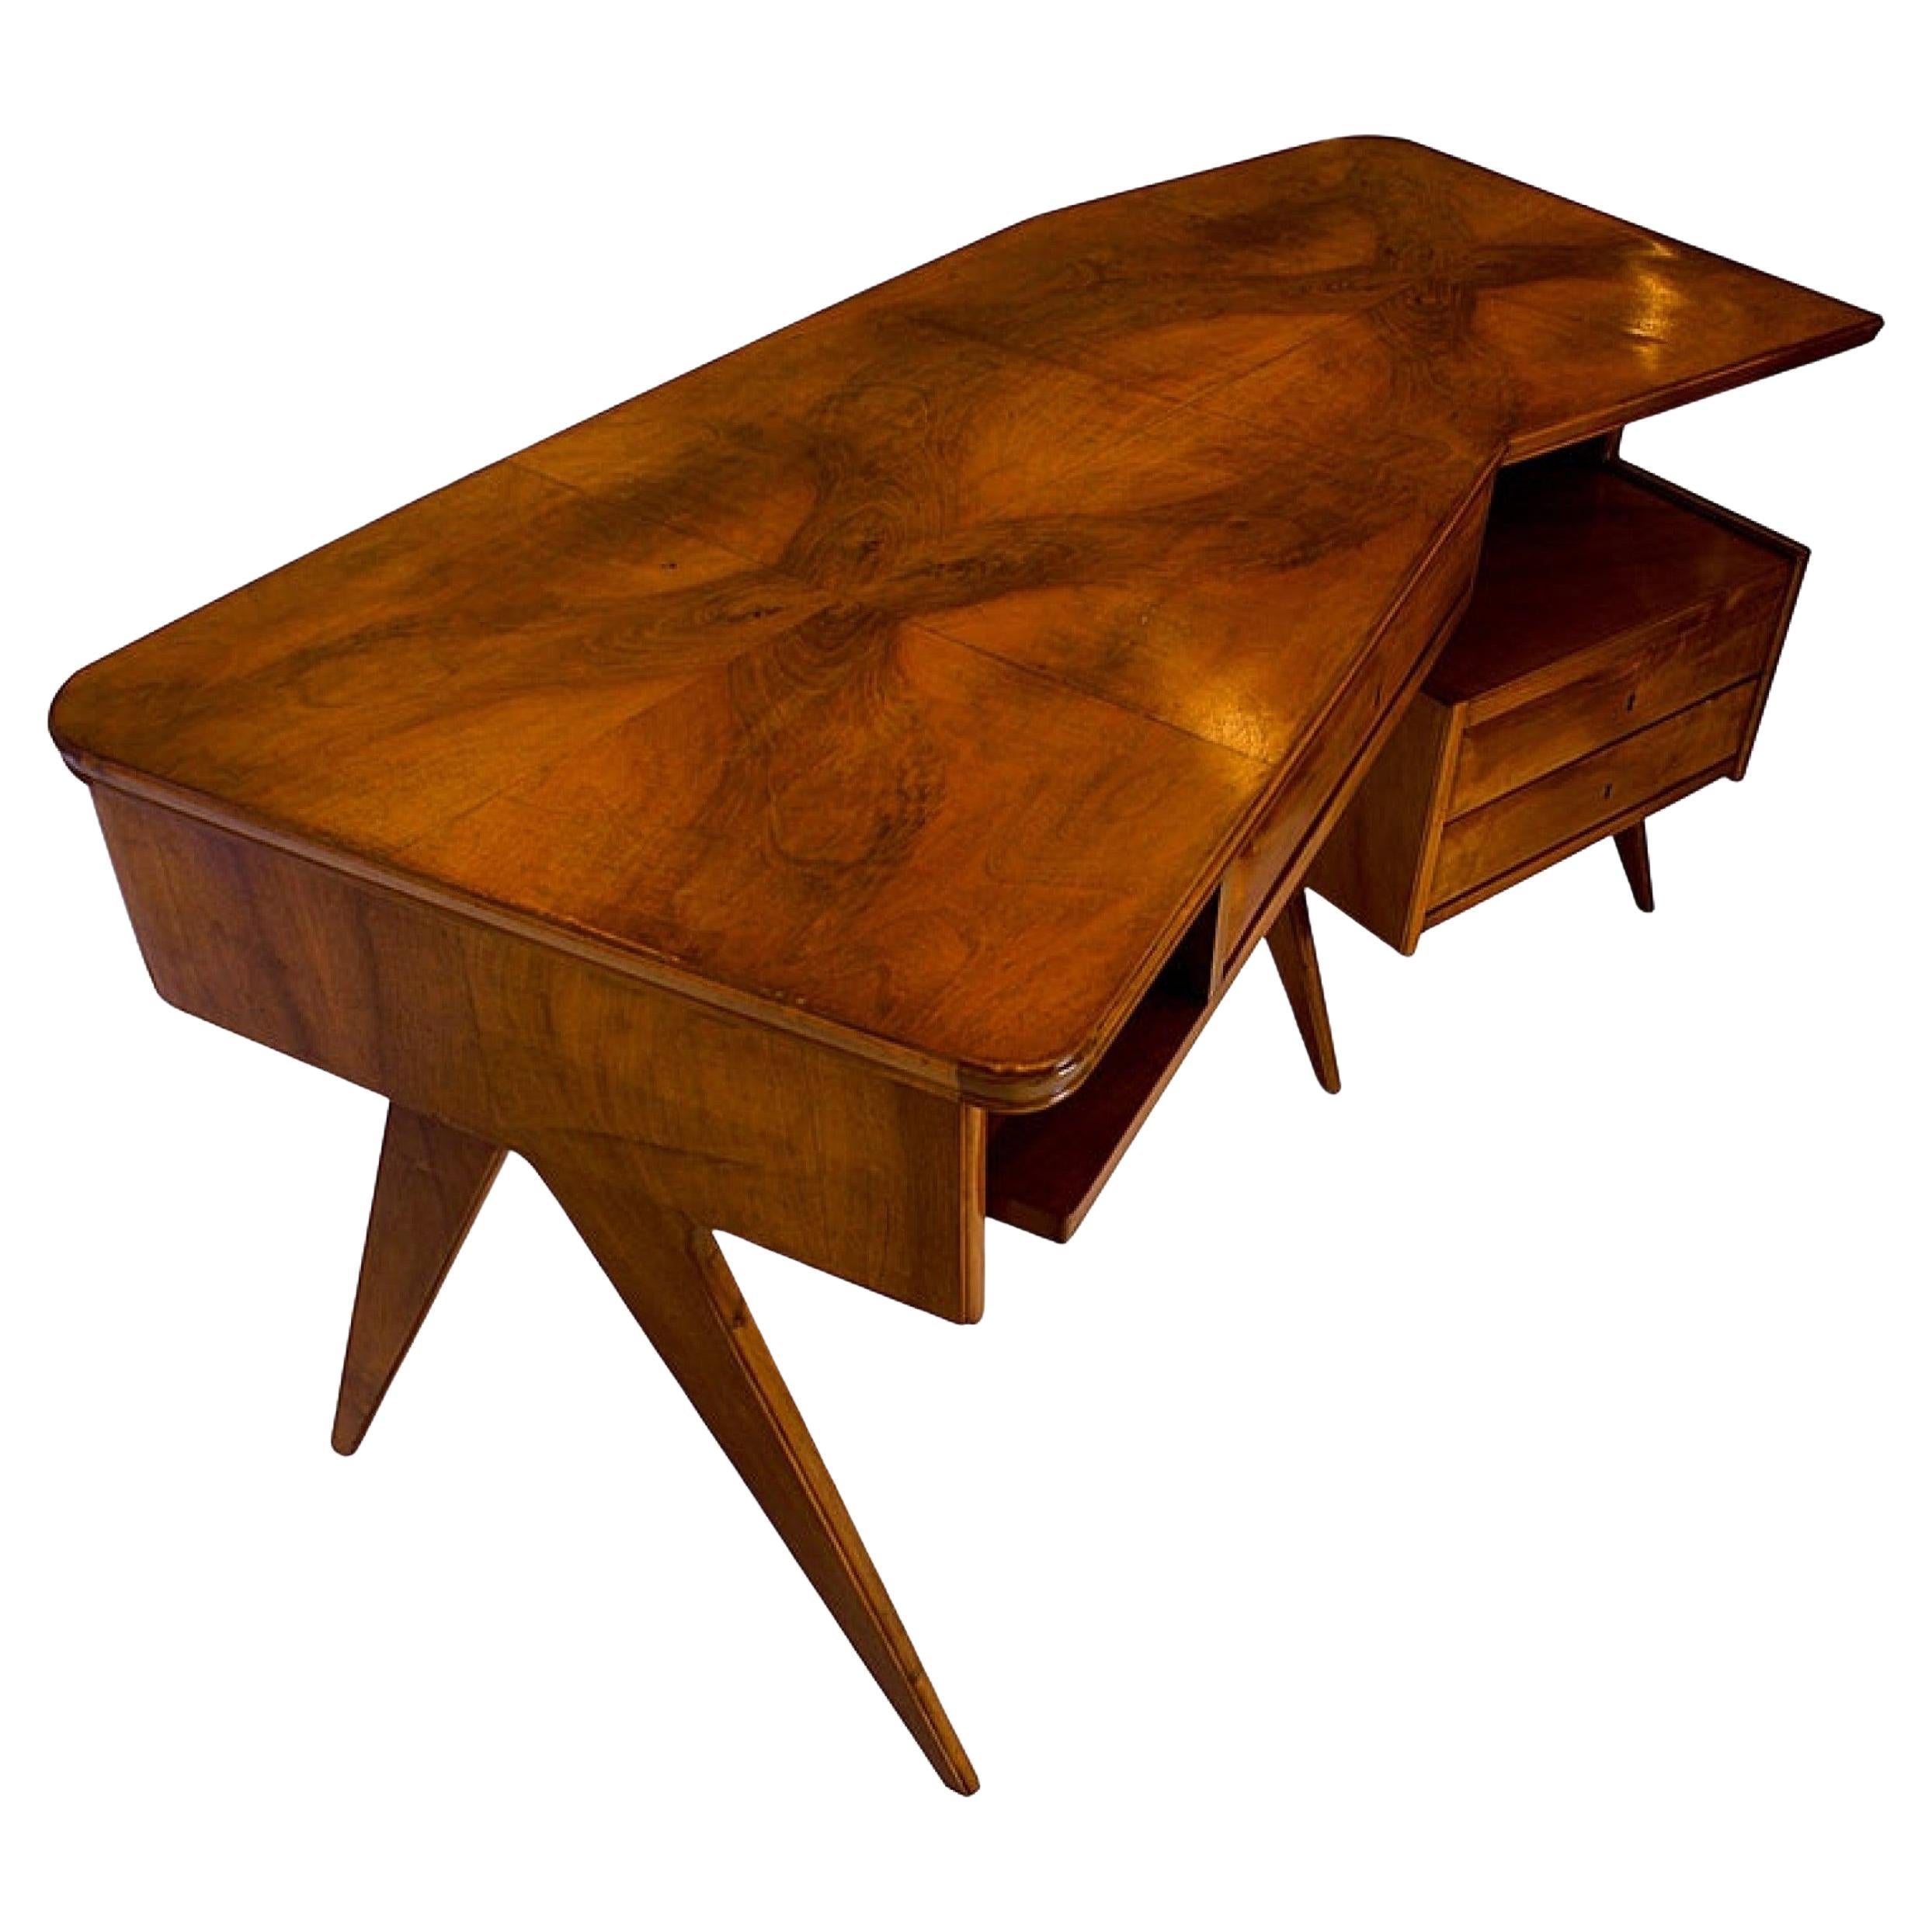 Italian Modern Walnut and Rootwood Desk, Attributed to Gio Ponti For Sale